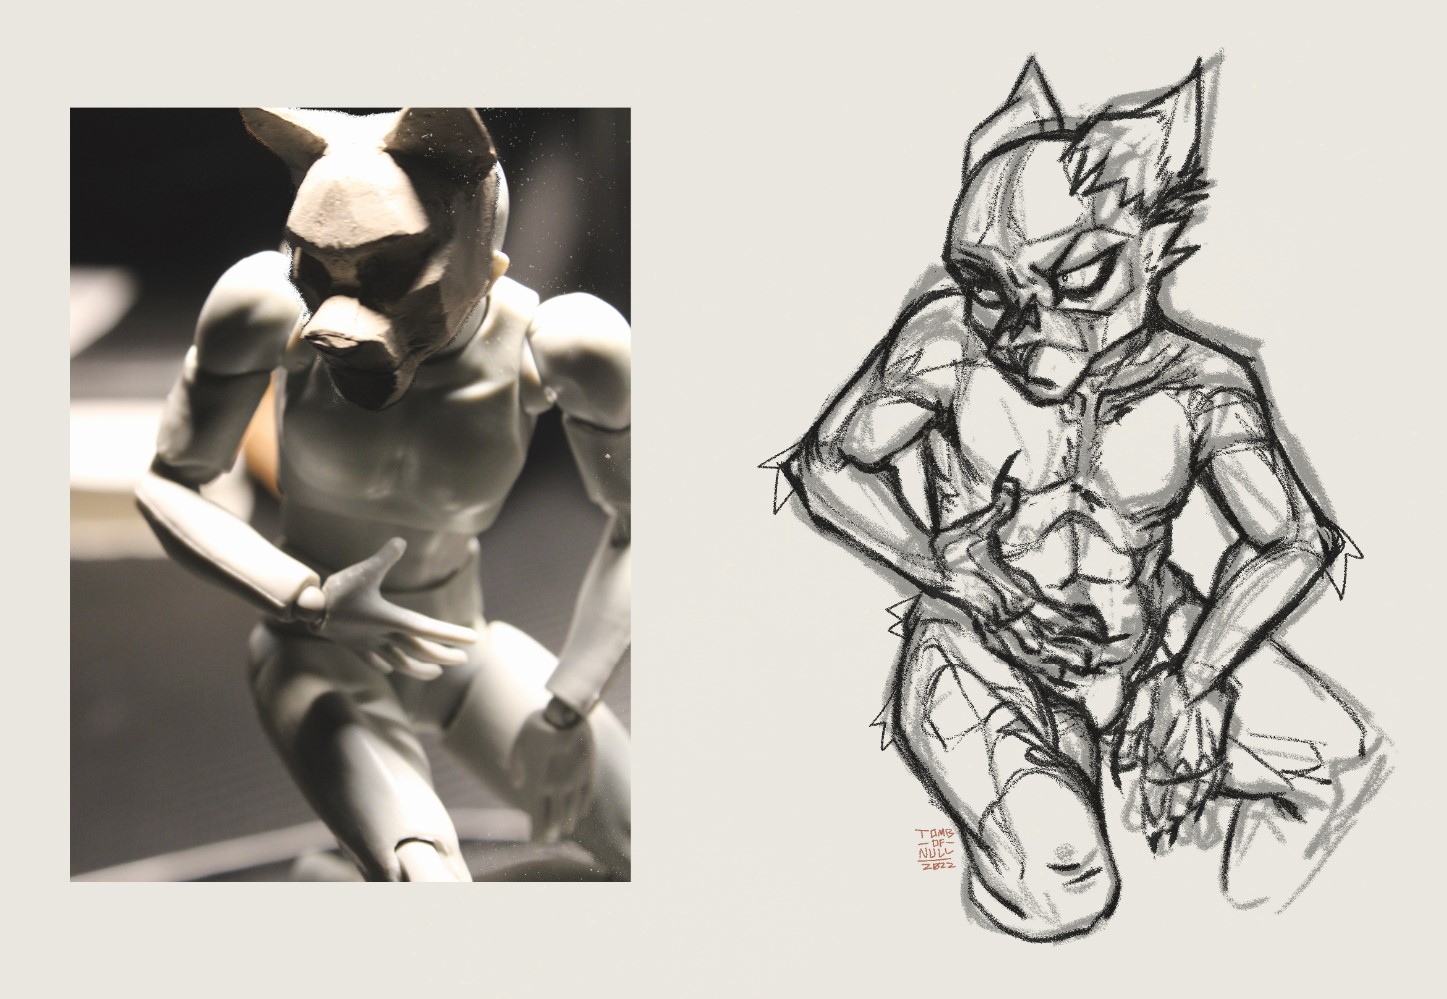 A photo of a artists doll/reference figure with dramatic lighting, with the head of a simplified feline sculpture. Next to it is a sketch of the main artwork based on the reference photo, that of a feline anhtro glaring to the veiwers left.